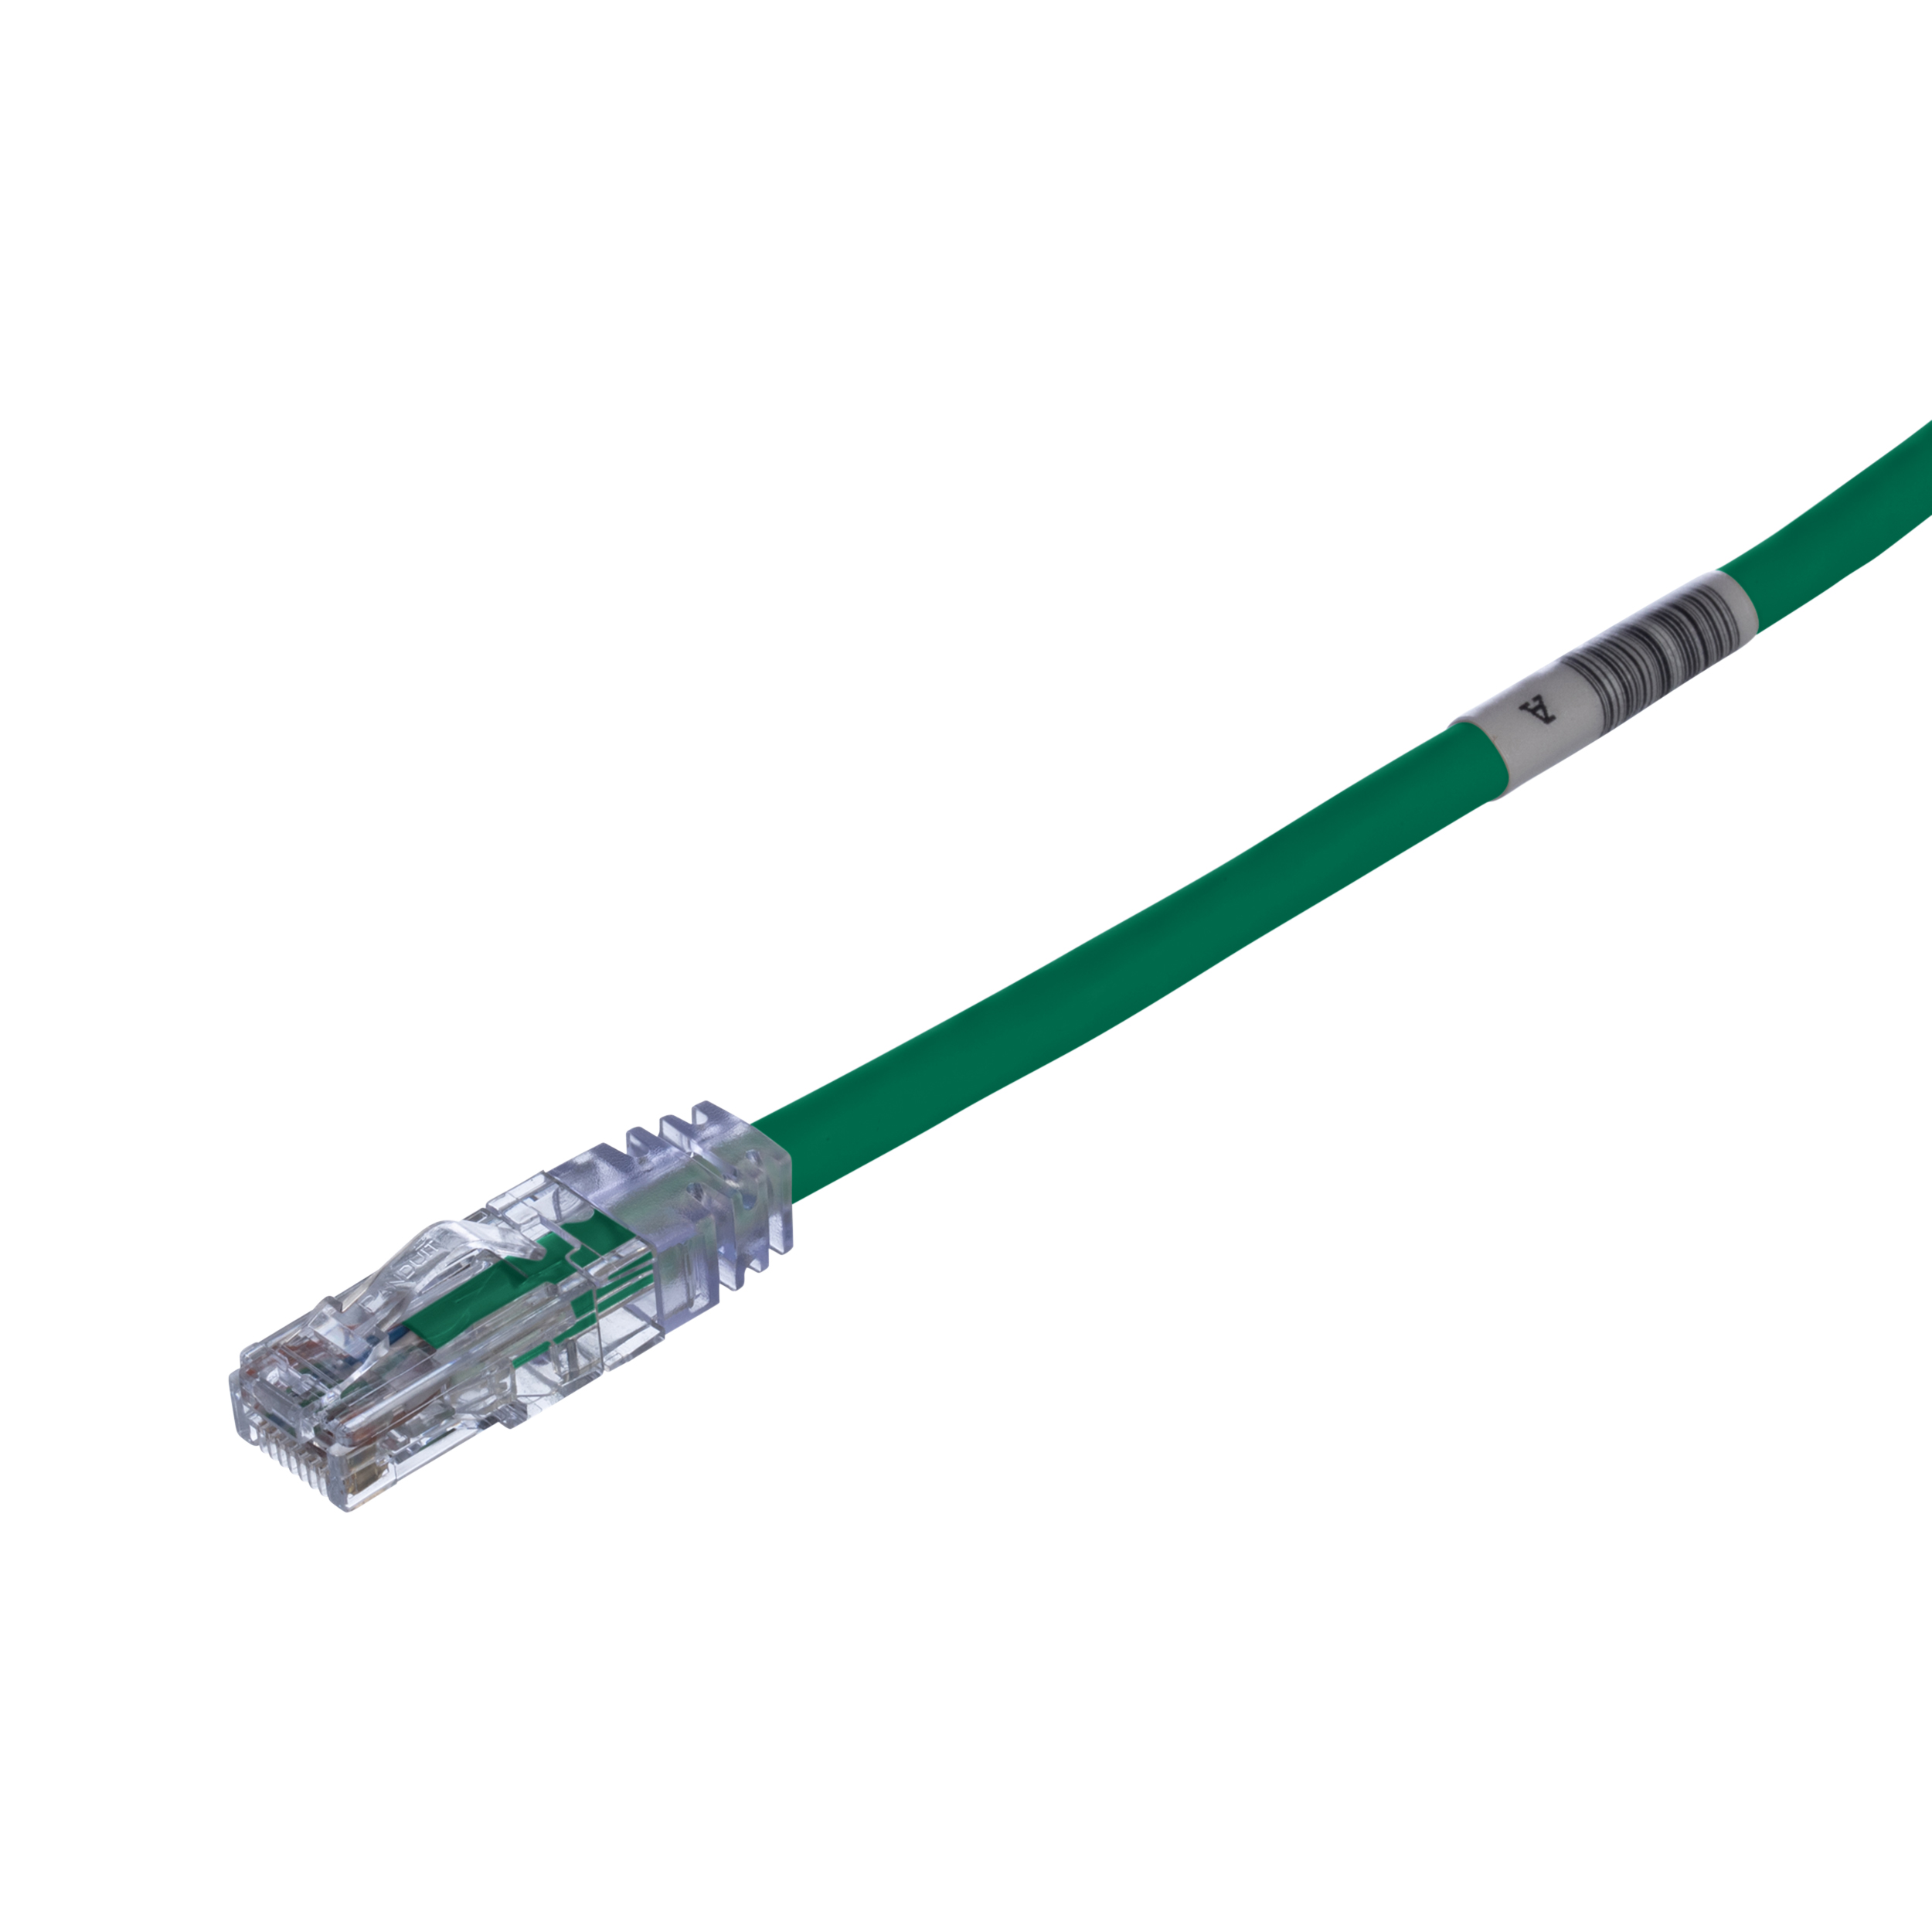 Cat 6 24 AWG UTP Copper Patch Cord, 1 m, Green